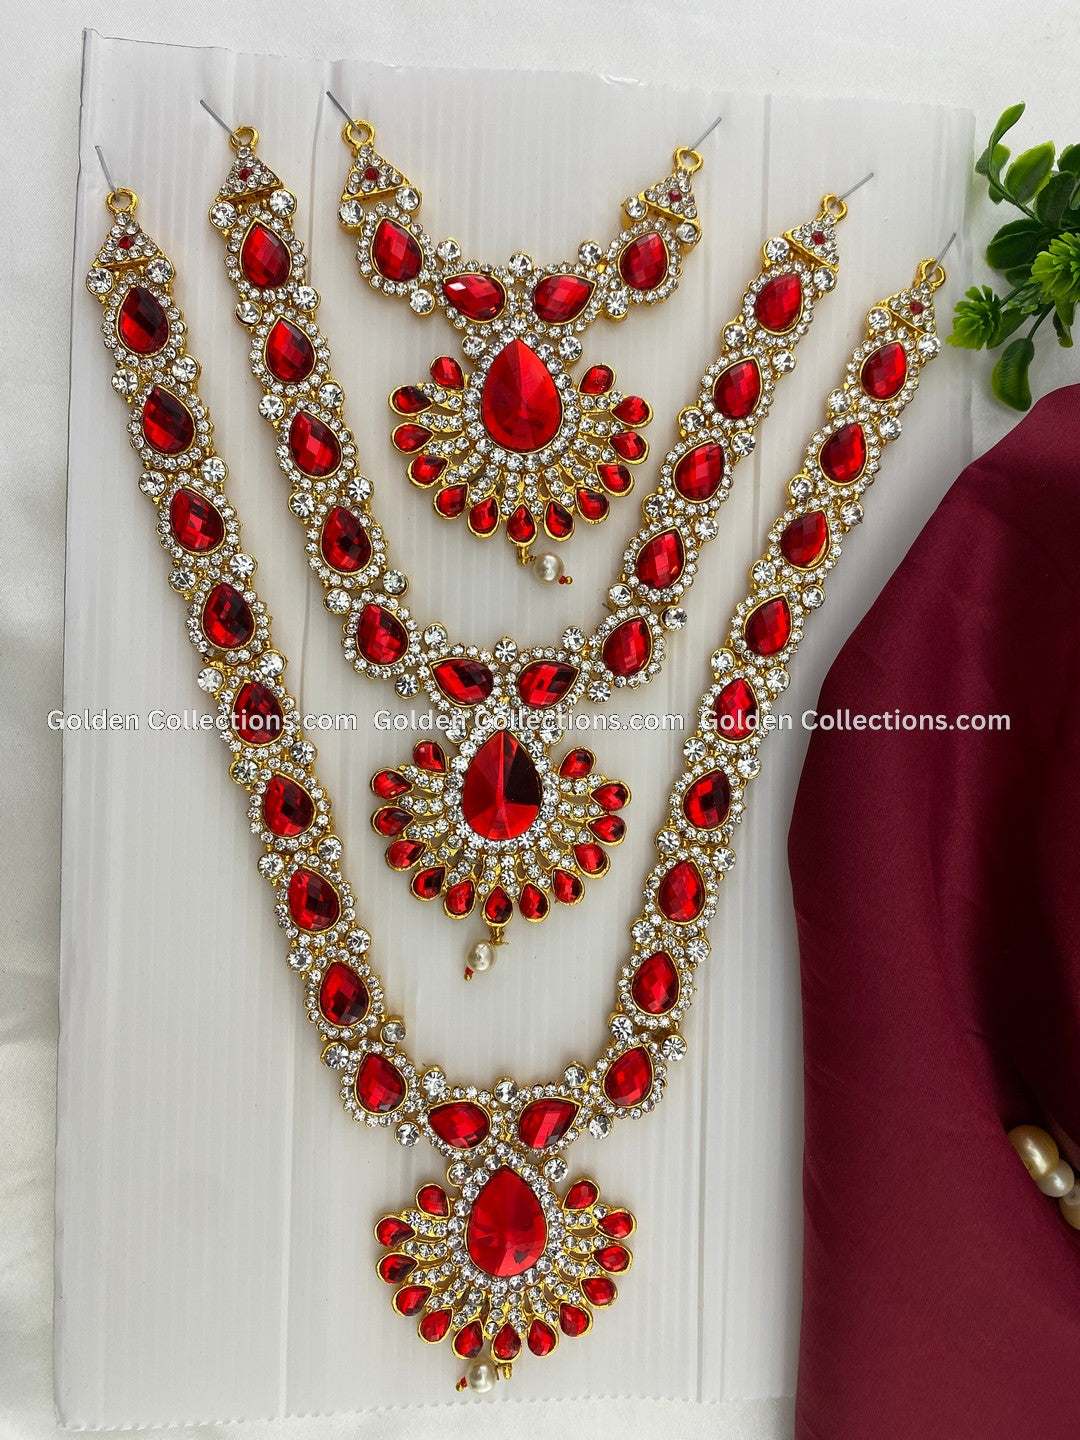 Deity Jewellery - Sacred Ornaments - GoldenCollections